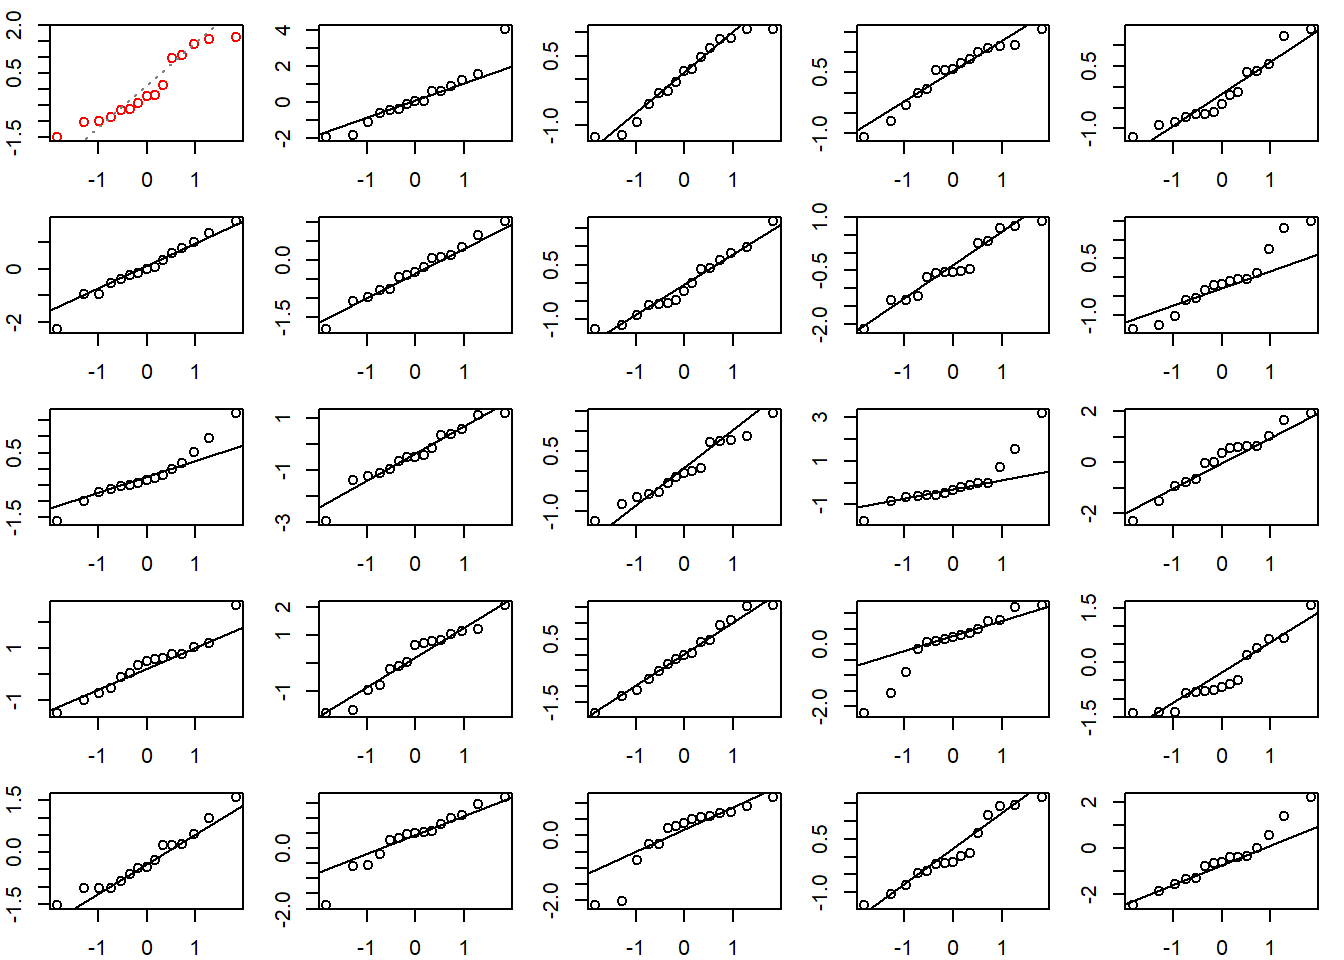 Plot containing 25 QQ plots, with top-left QQ plot in red to identify as original QQ plot.